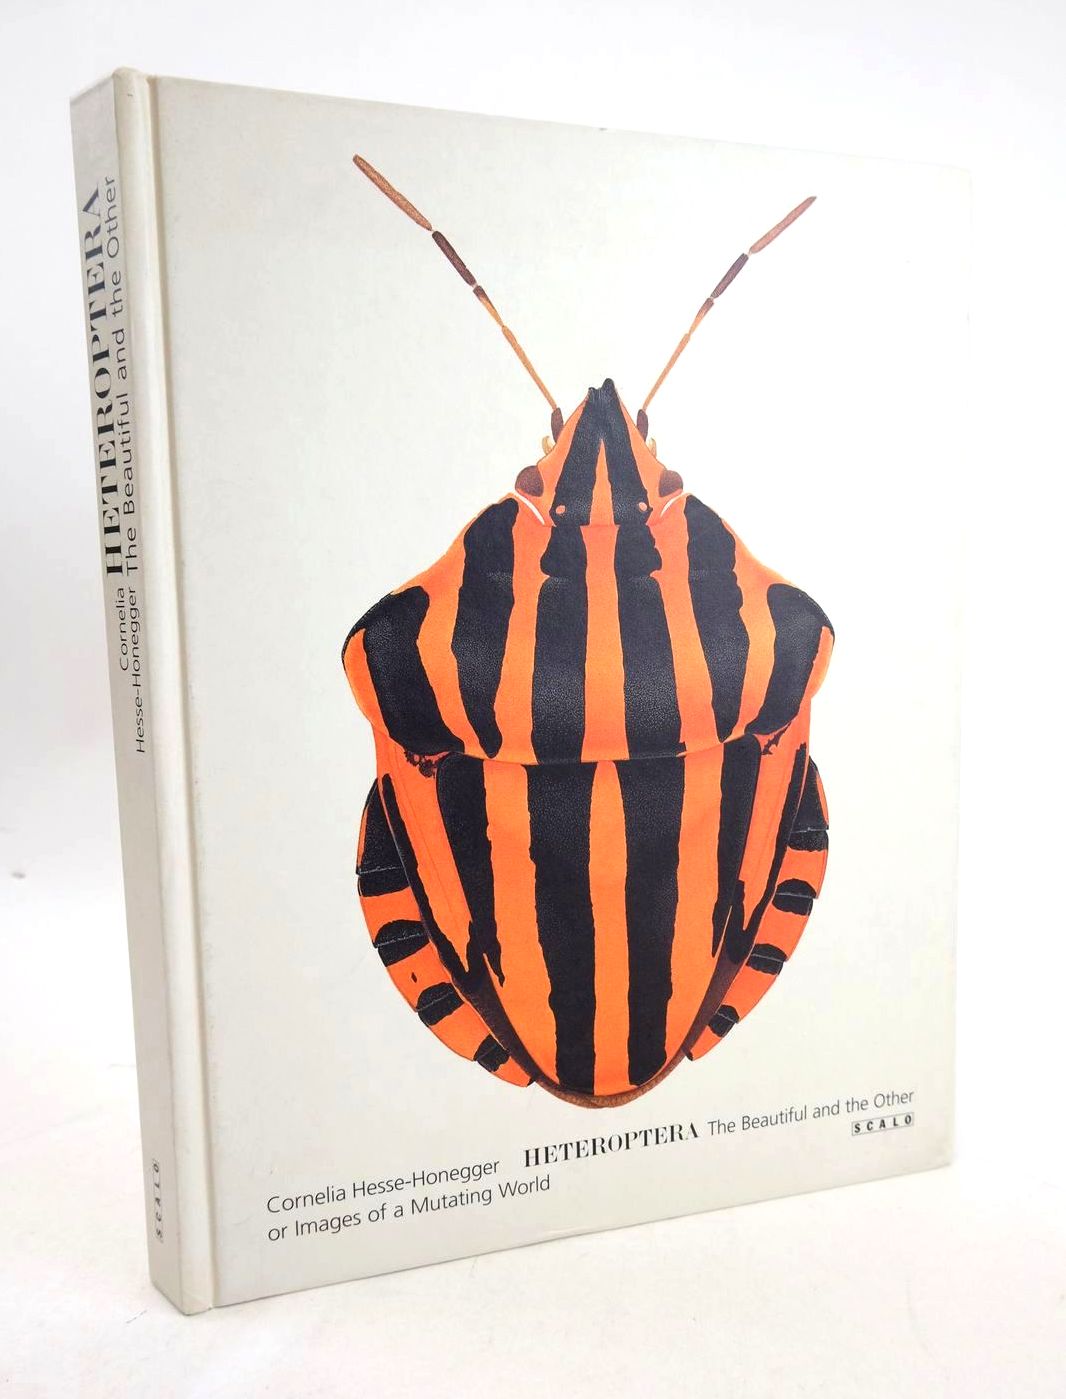 Photo of HETEROPTERA: THE BEAUTIFUL AND THE OTHER, OR IMAGES OF A MUTATING WORLD written by Hesse-Honegger, Cornelia published by Scalo Zurich (STOCK CODE: 1327294)  for sale by Stella & Rose's Books